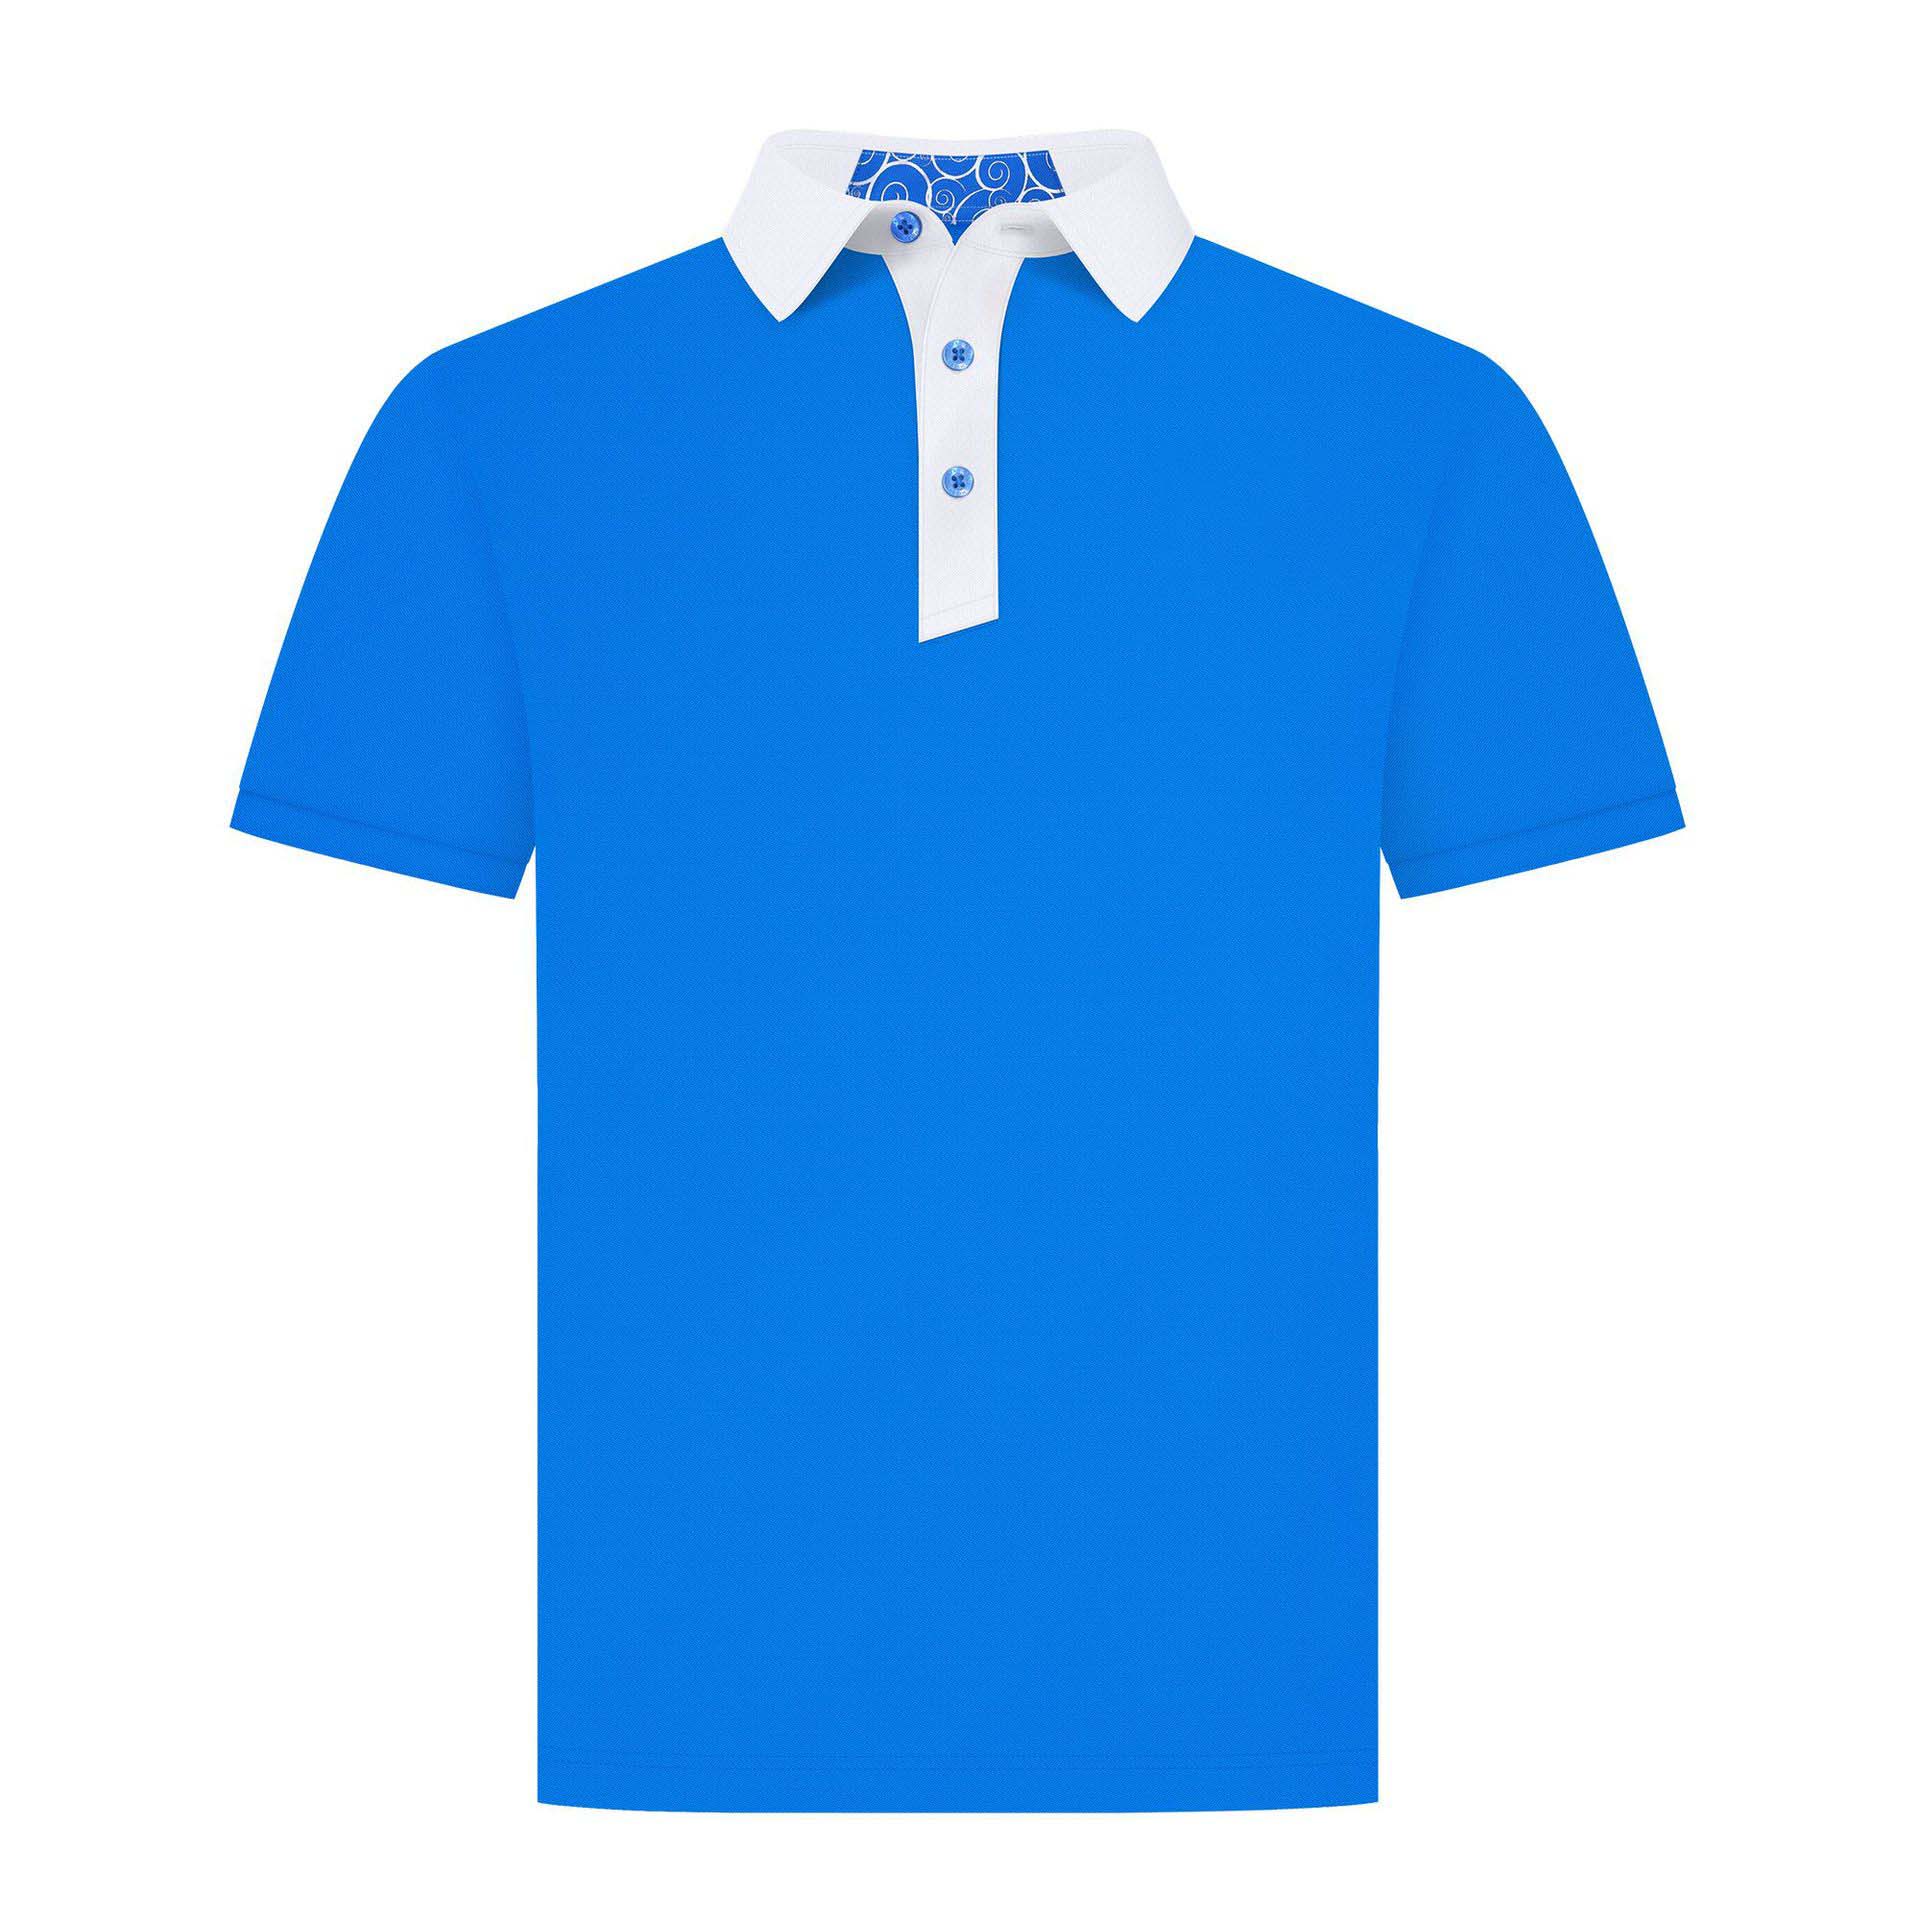 Polo shirts for promotional campaigns